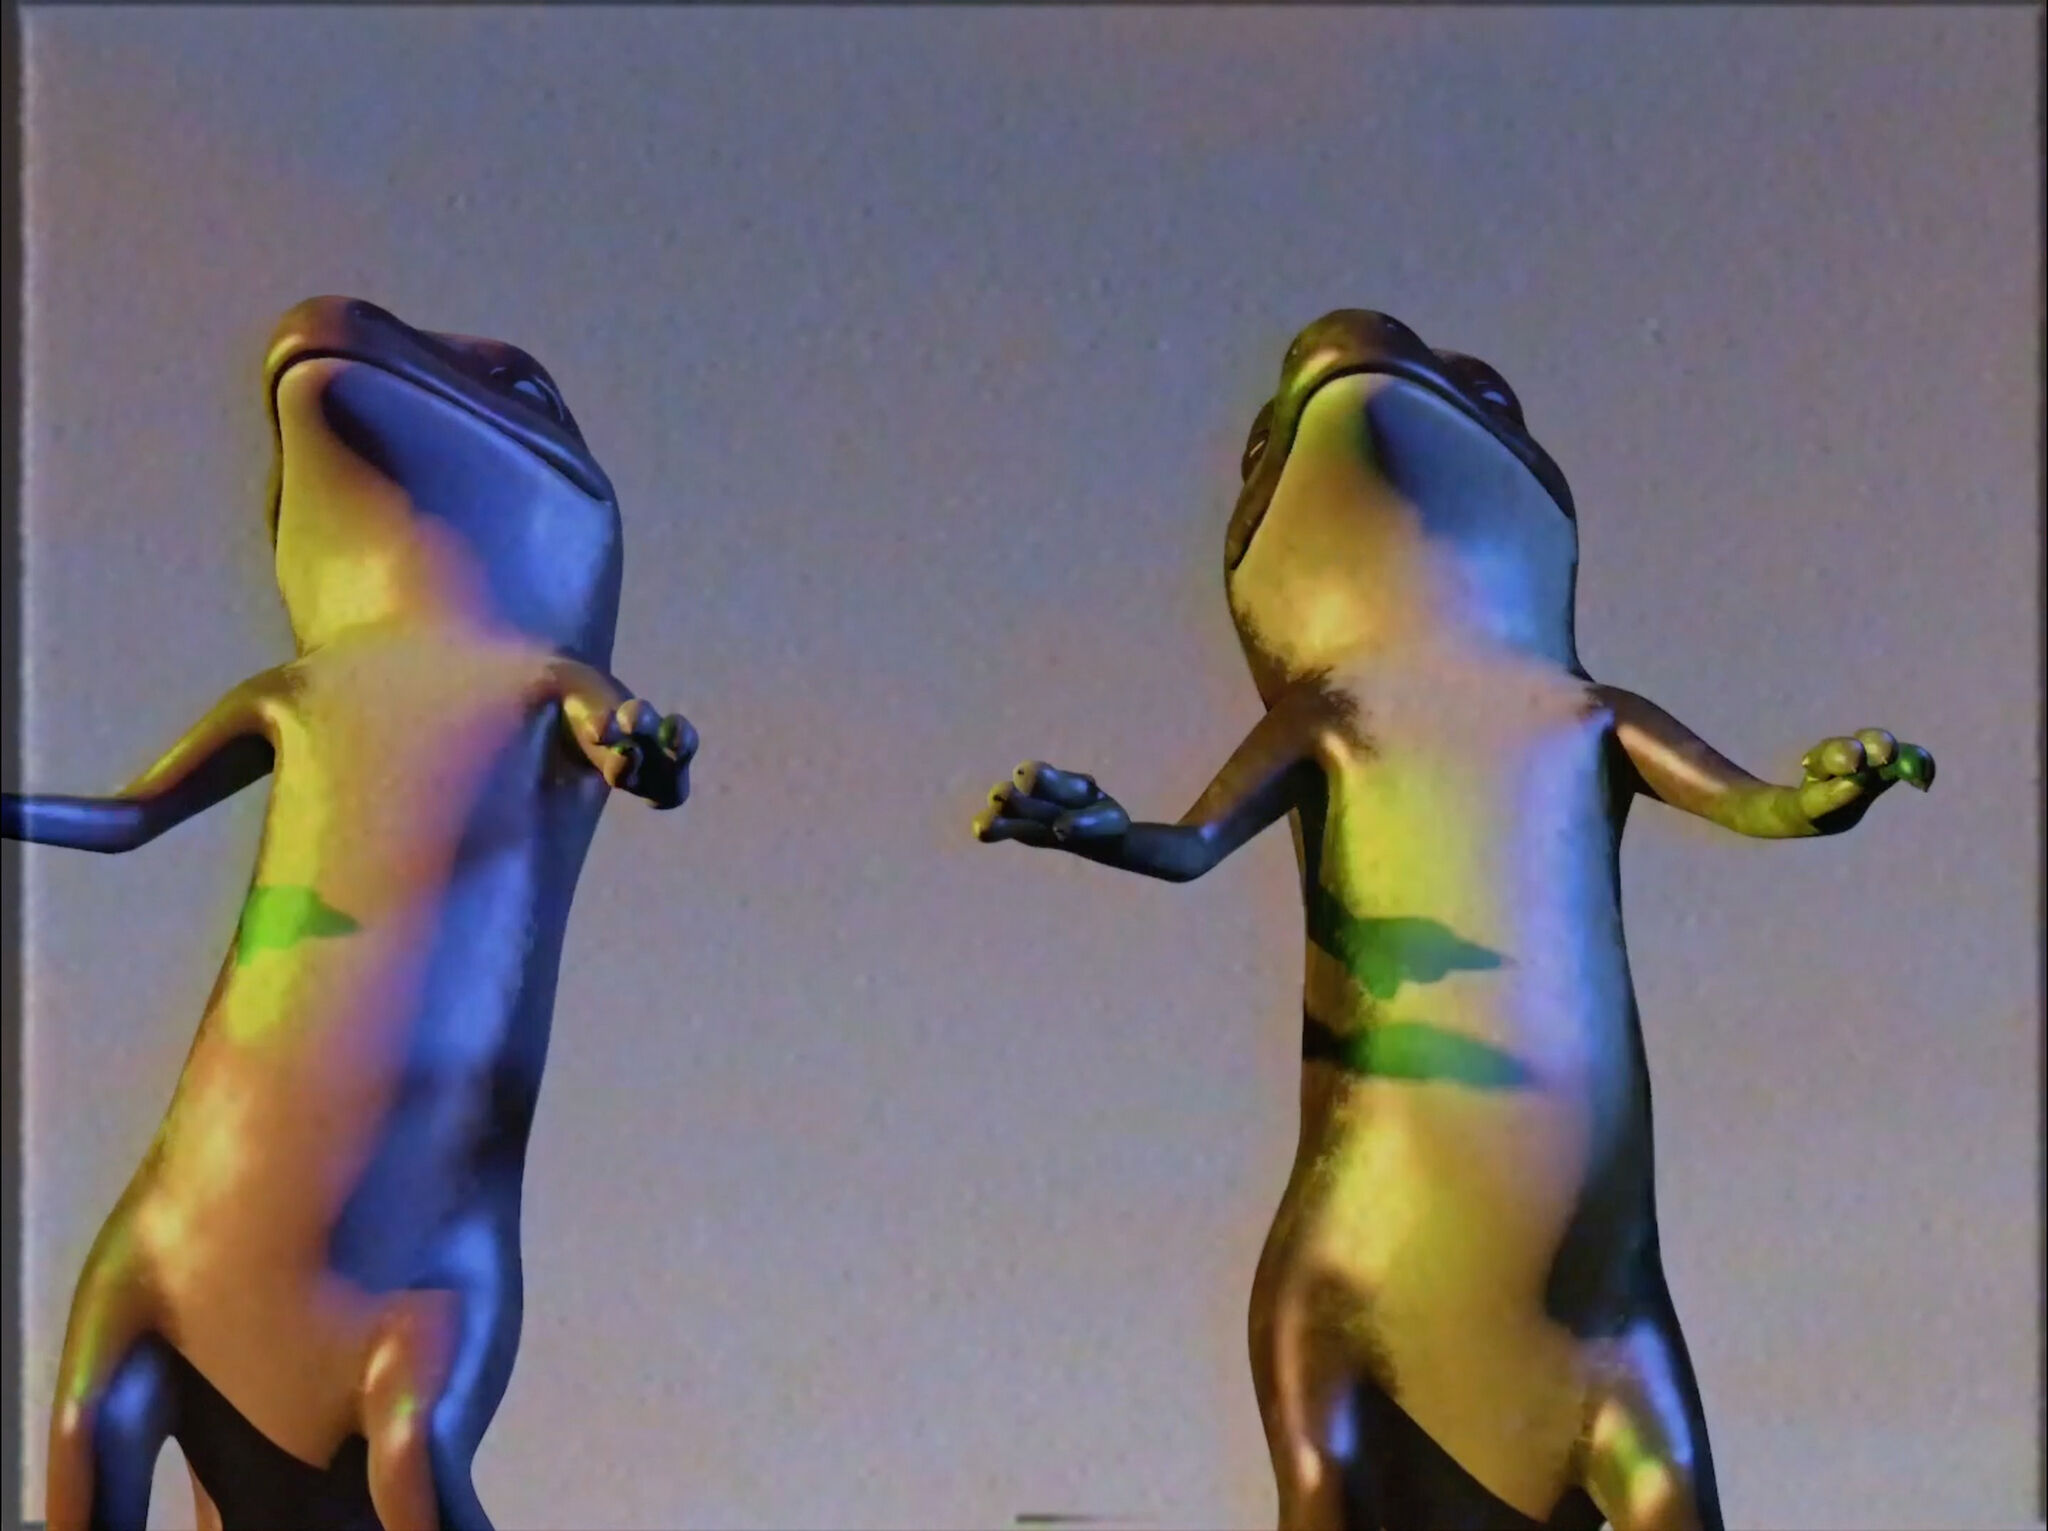 A film still featuring two animated lizards standing next to each other with an open sky behind them.